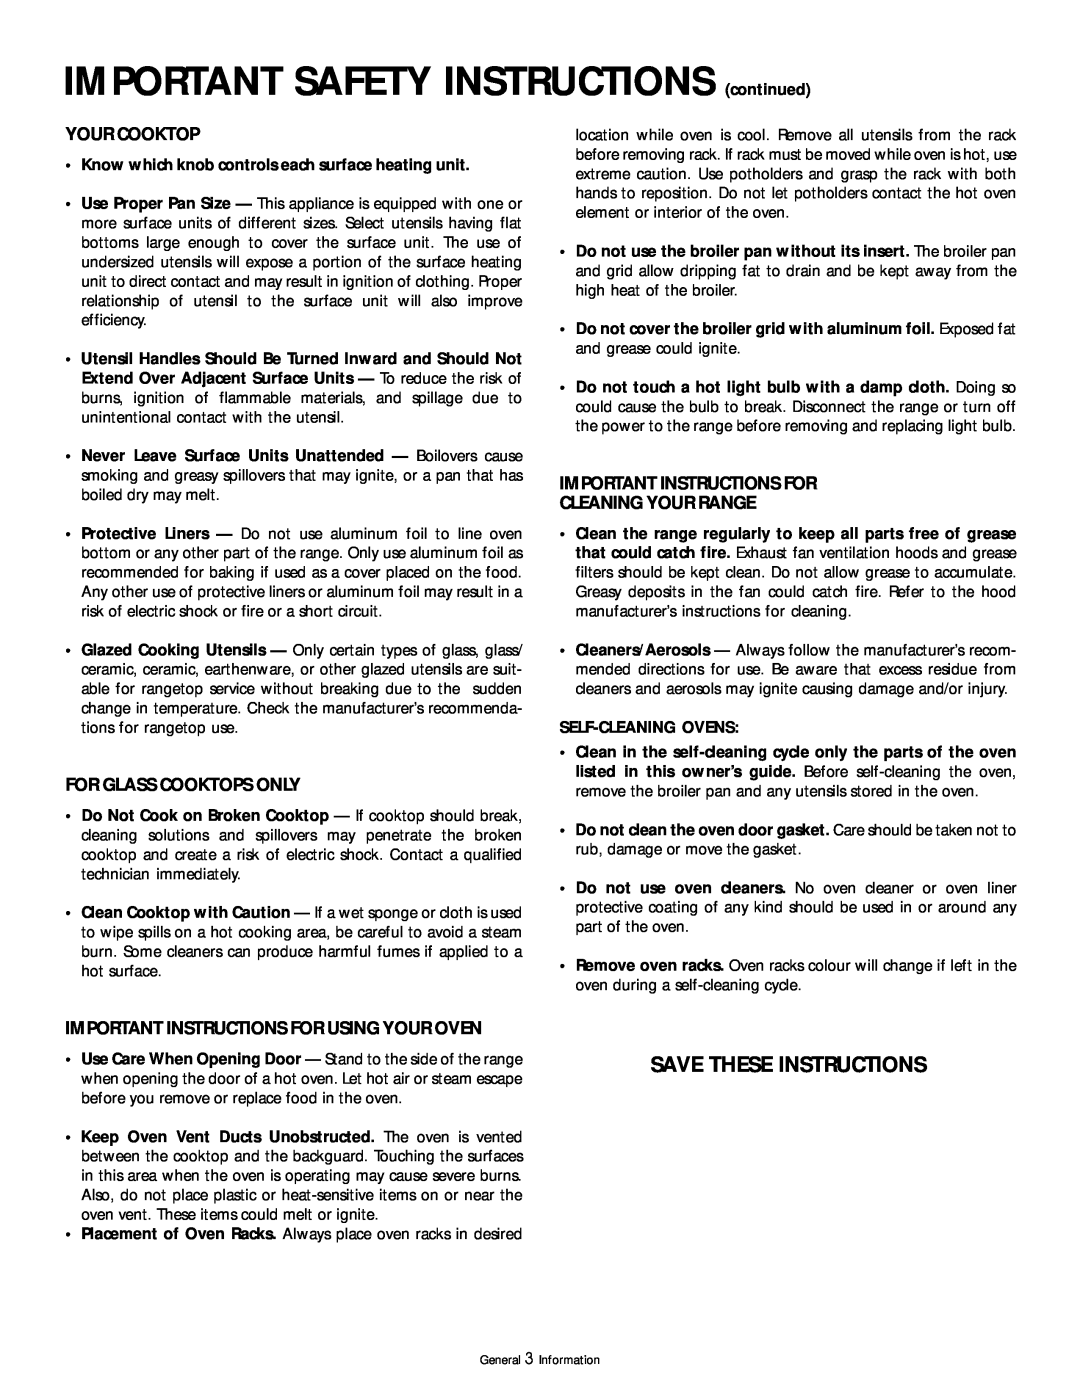 Frigidaire 318200404 IMPORTANT SAFETY INSTRUCTIONS continued, Save These Instructions, Your Cooktop, Self-Cleaning Ovens 